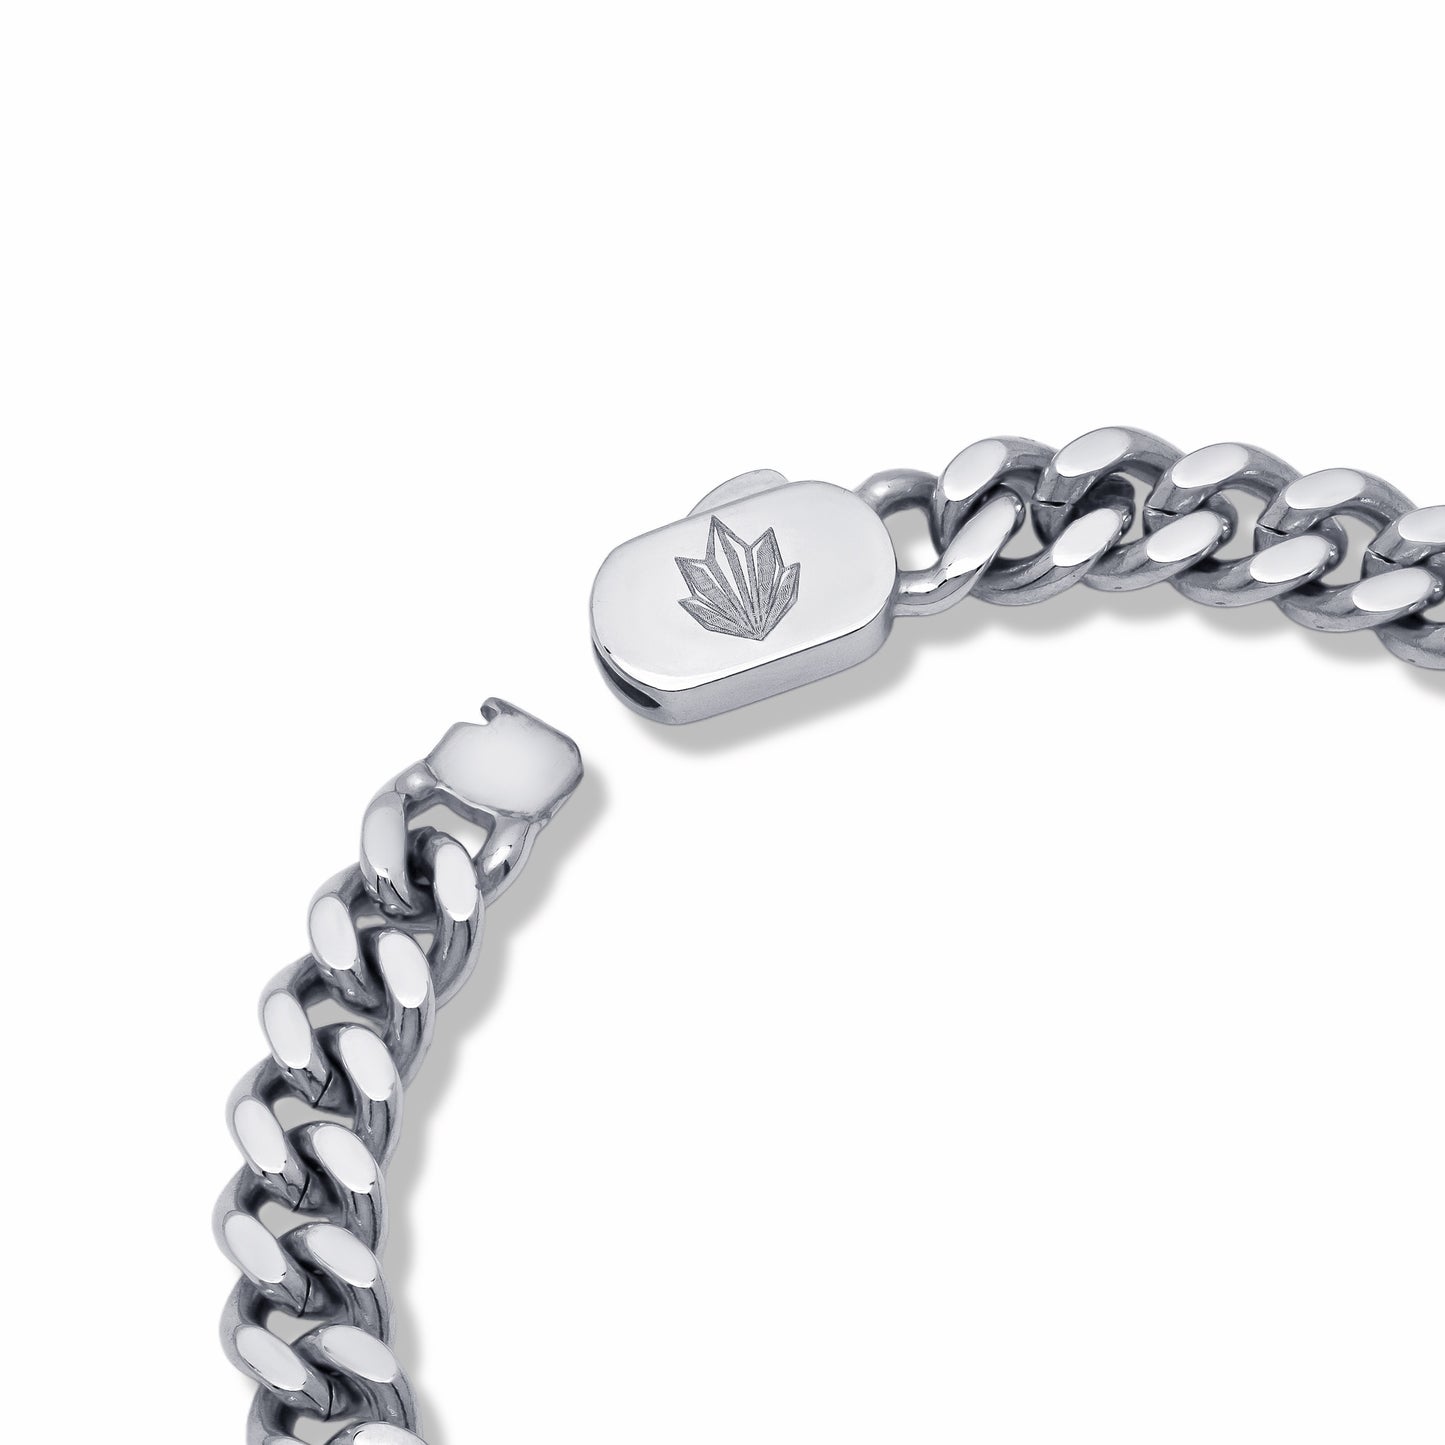 Cuban Chain Bracelet Silver 6mm - unfastened lock with engraved Crysttal Logo